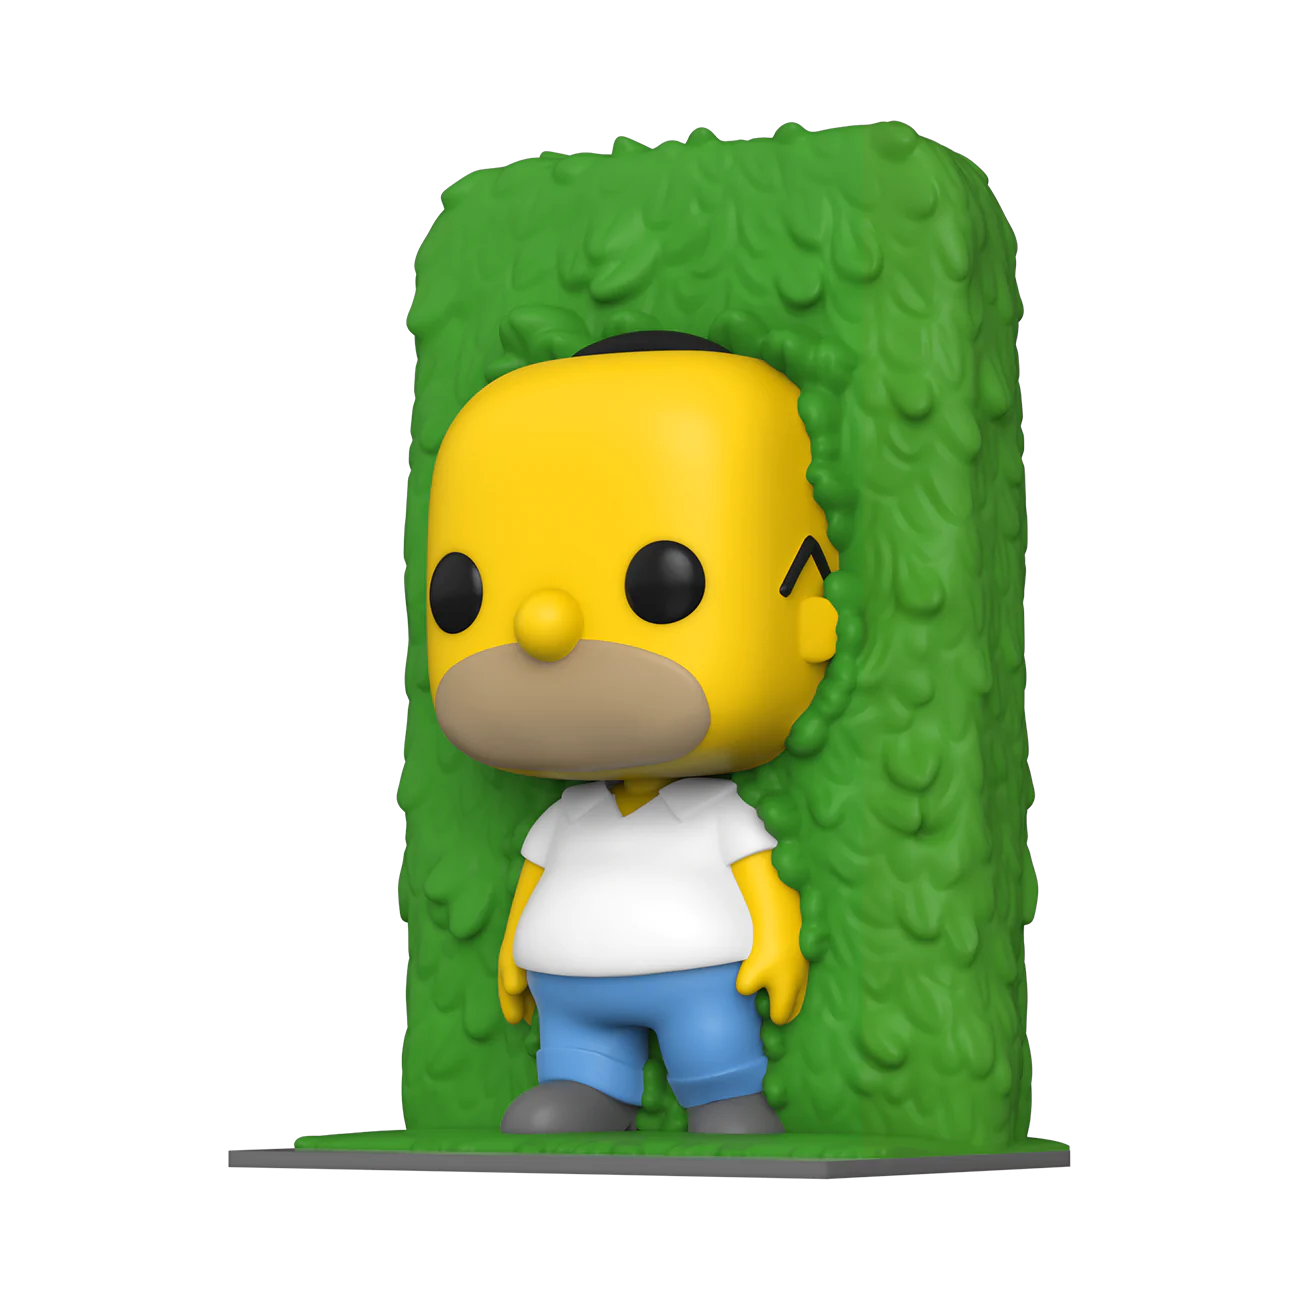 Homer in Hedges 1252 EE Exclusive - Funko Pop! Television